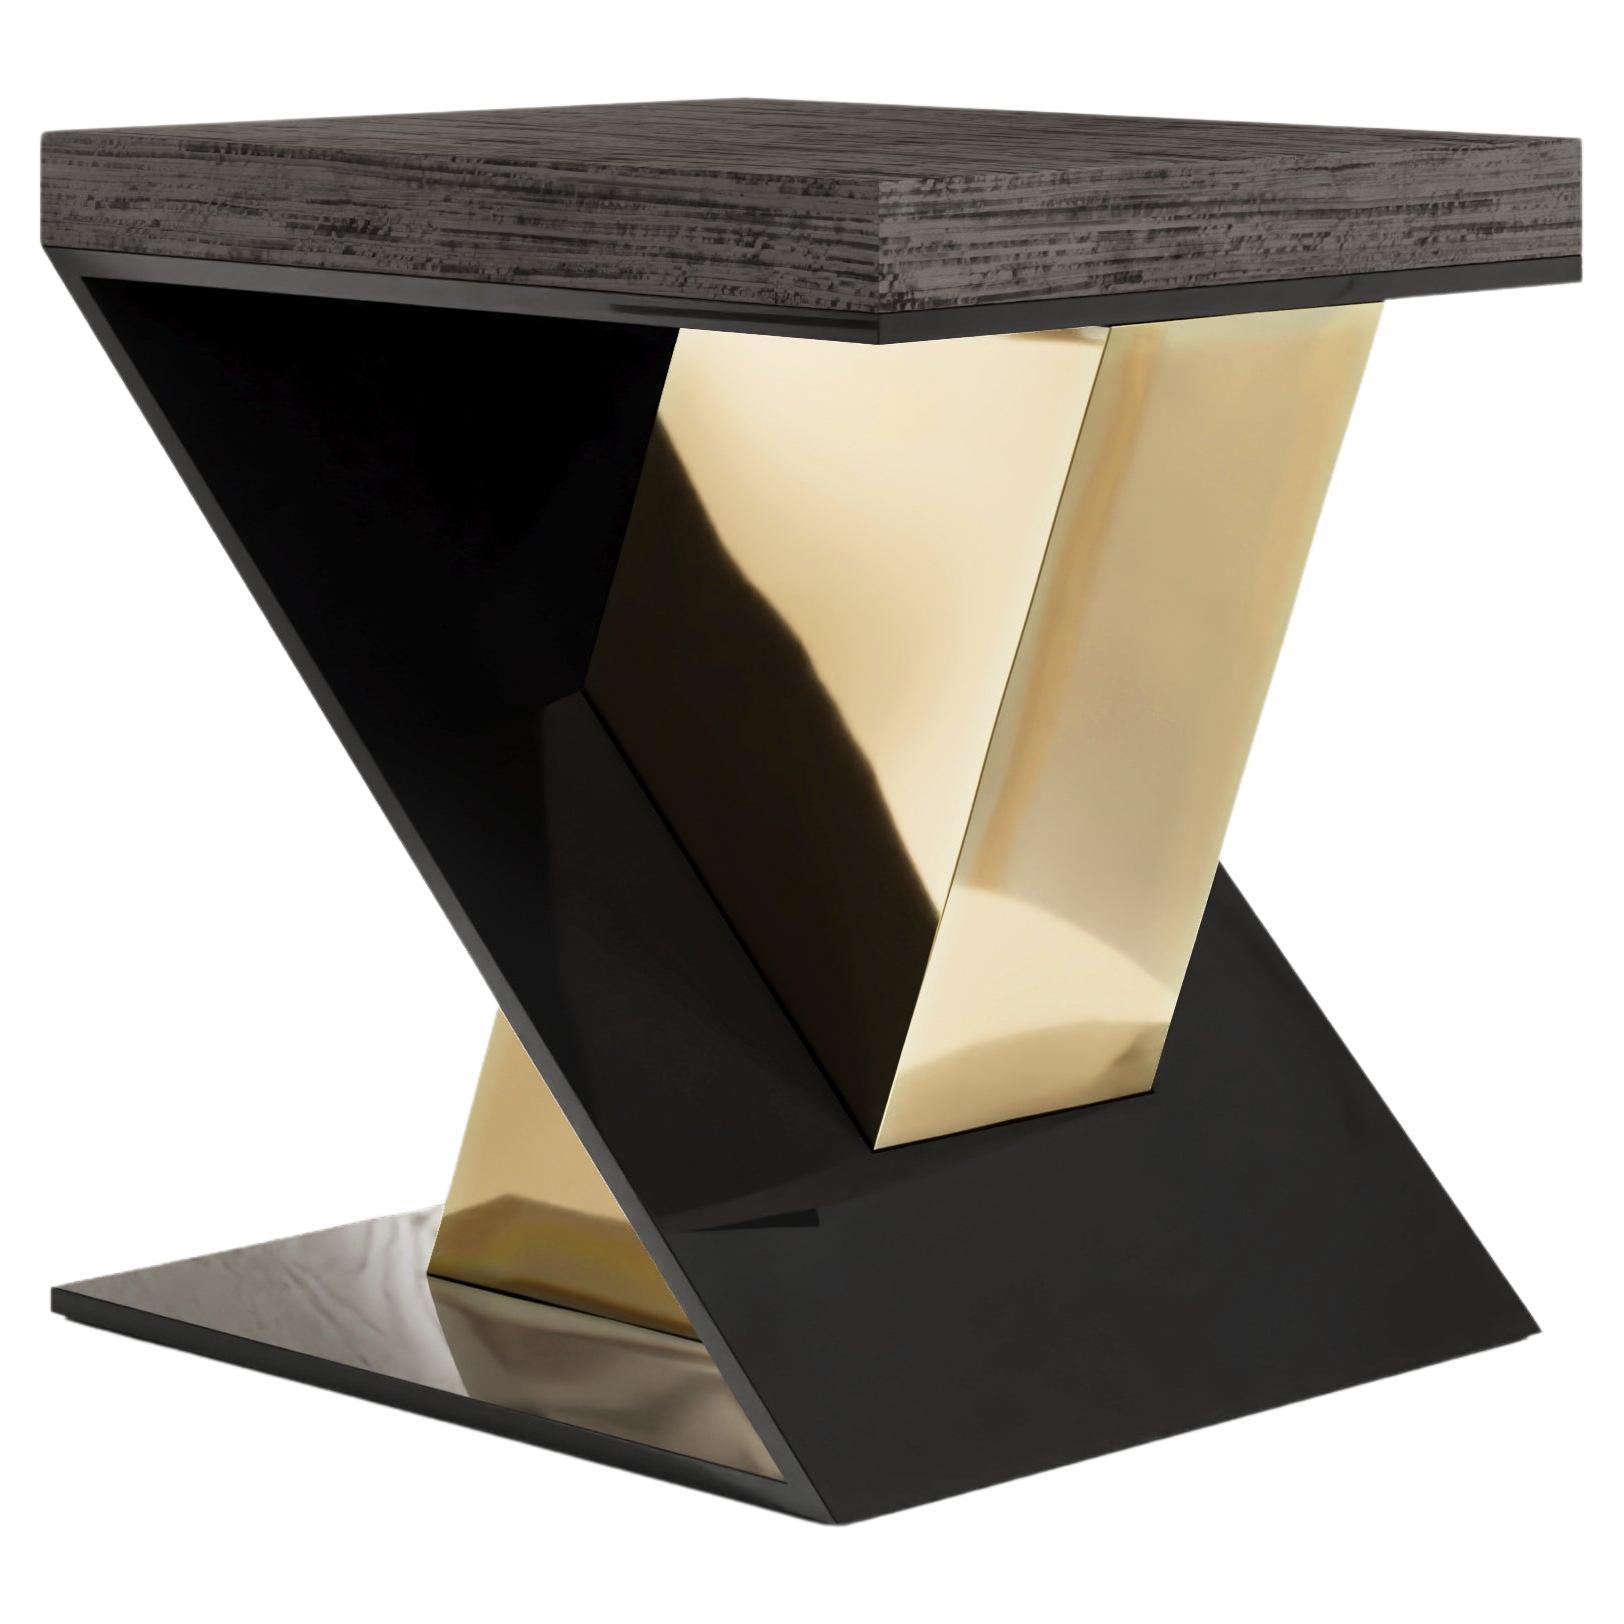 Gero Side Table in polished bronze and Eucalyptus